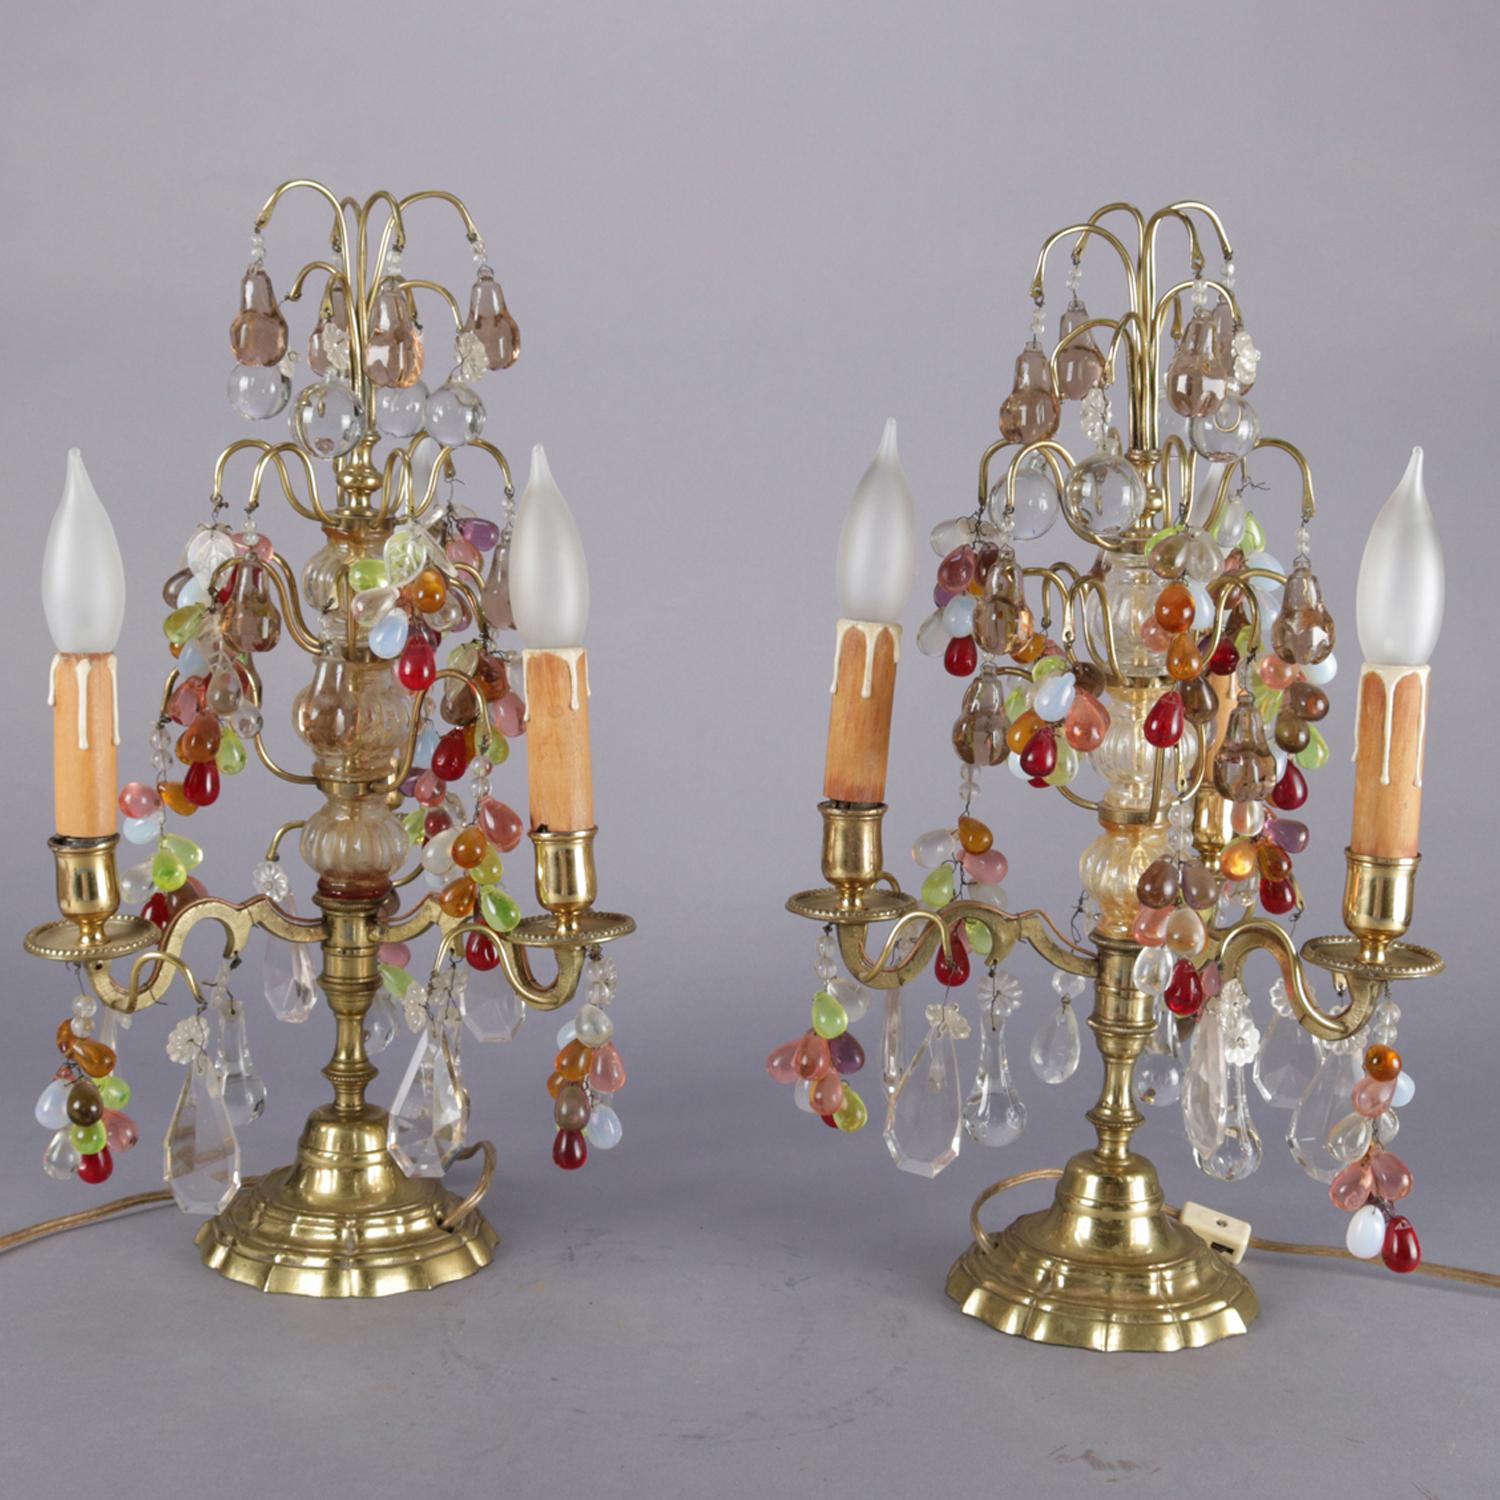 20th Century Antique Pair of Bronze and Crystal Prism Fruit Candelabra Lamps, Grape and Leaf